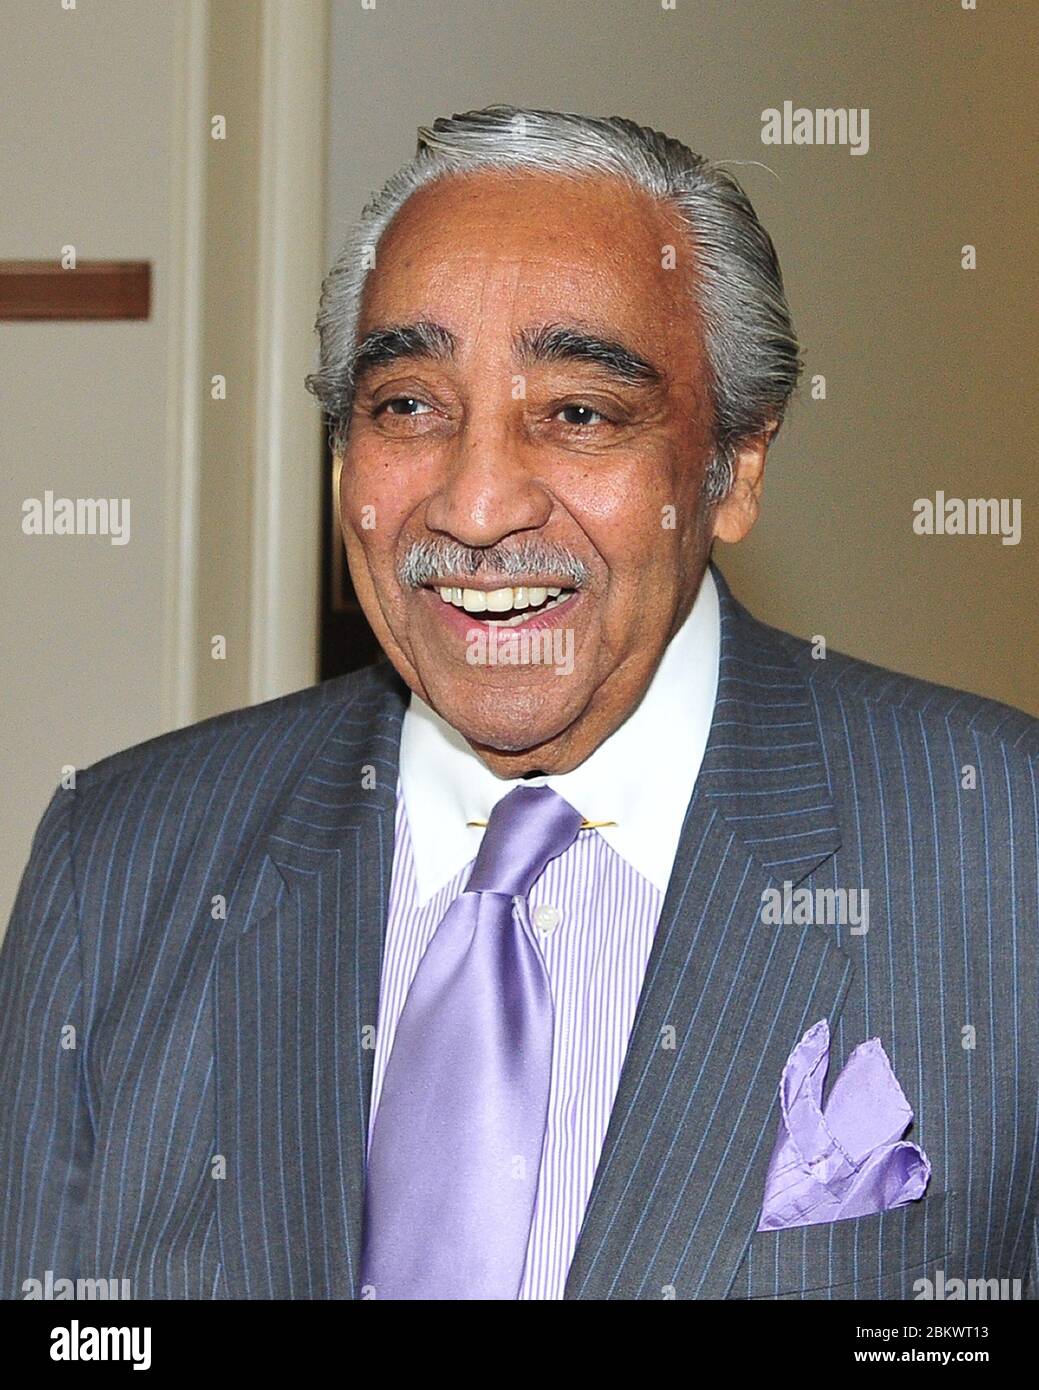 United States Representative Charlie Rangel (Democrat of New York) departs his Capitol Hill office on Tuesday, November 30, 2010.Credit: Ron Sachs / CNP  (RESTRICTION: NO New York or New Jersey Newspapers or newspapers within a 75 mile radius of New York City) / MediaPunch Stock Photo